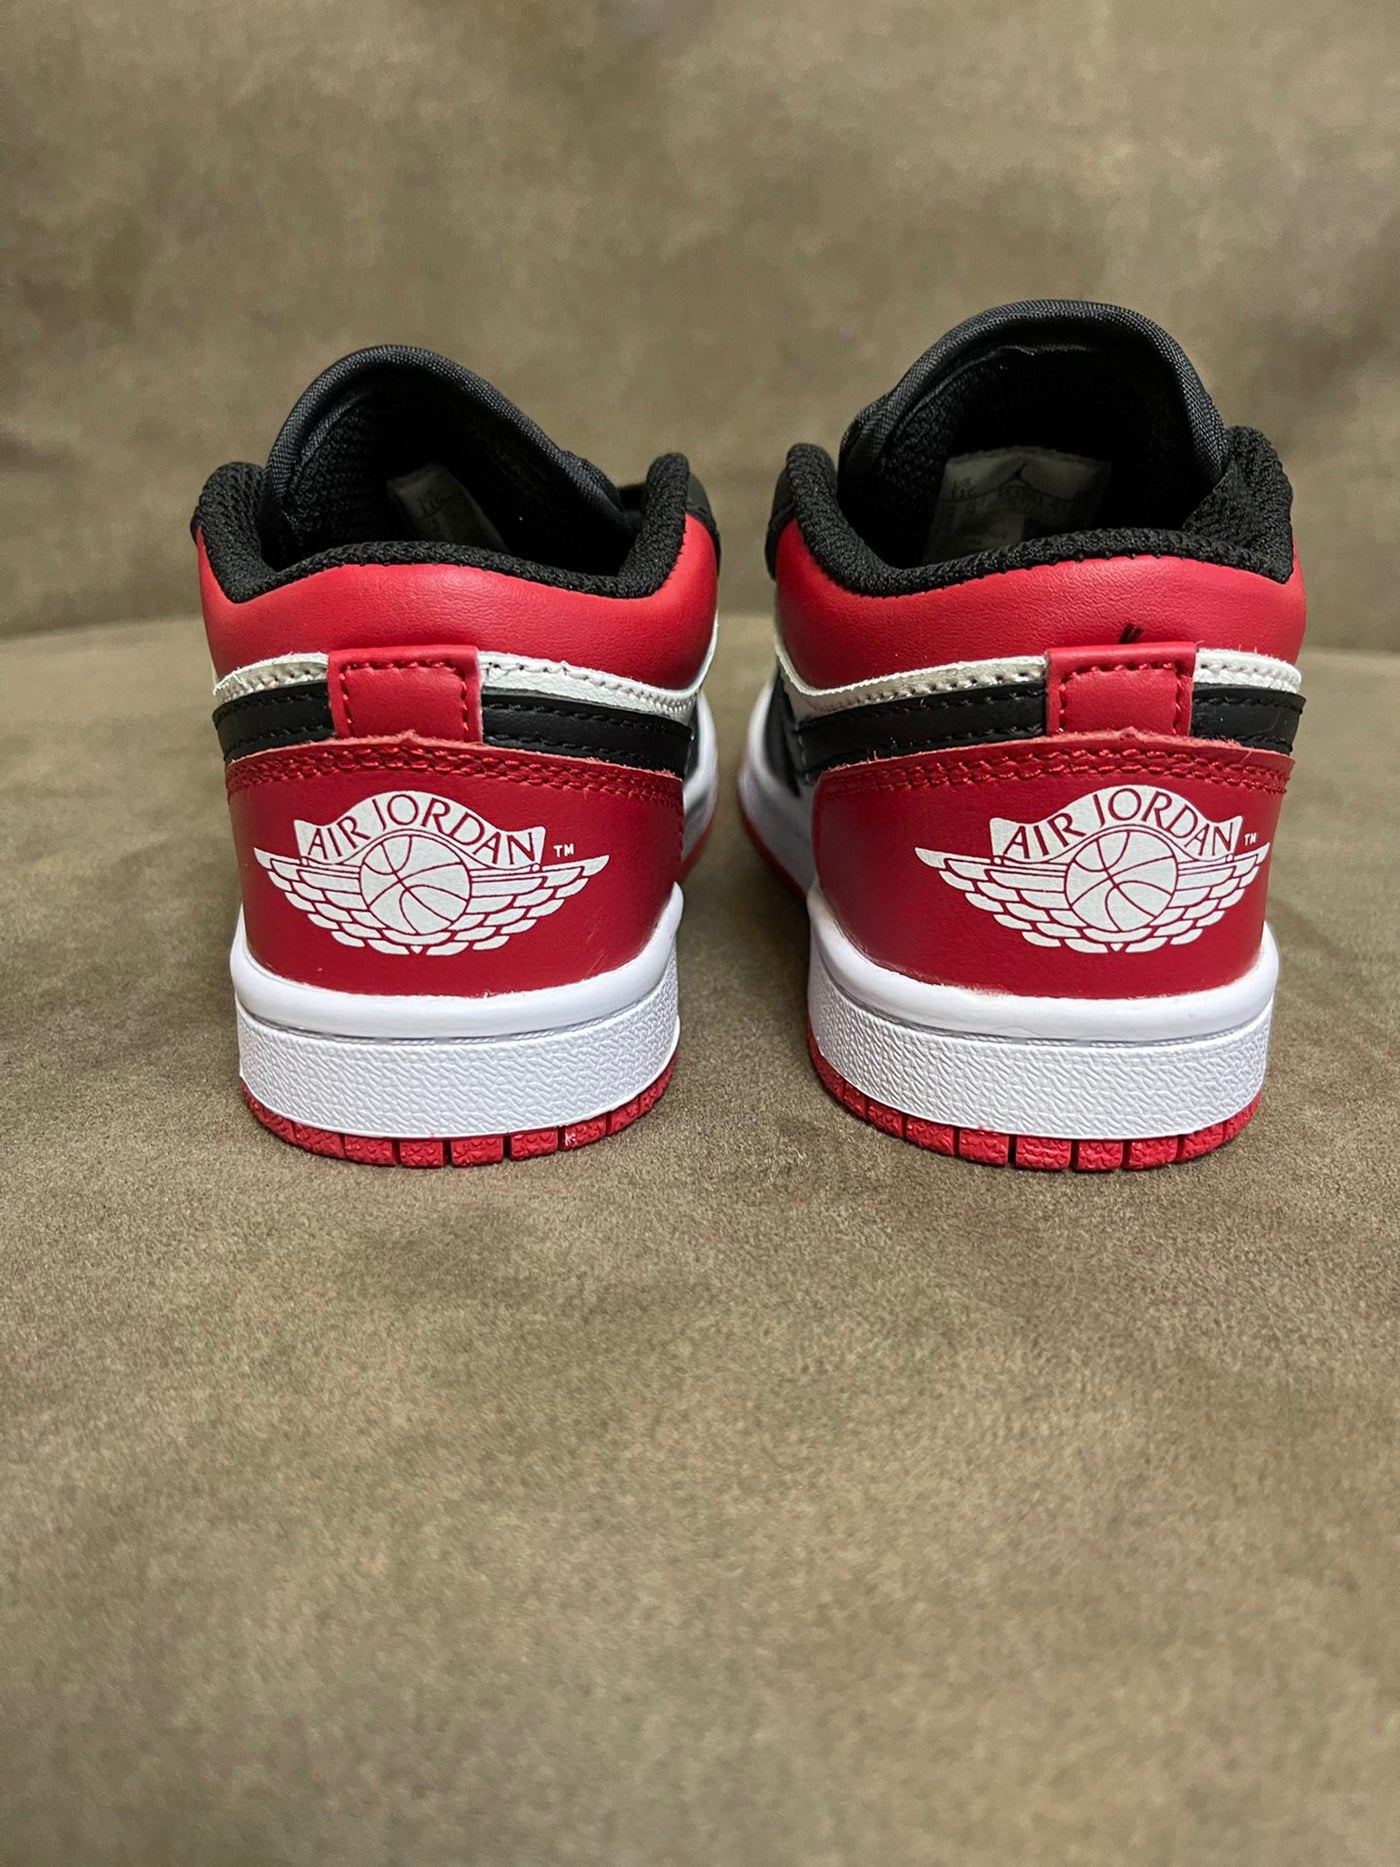 Baby Shoes Jordan Low Red White and Black